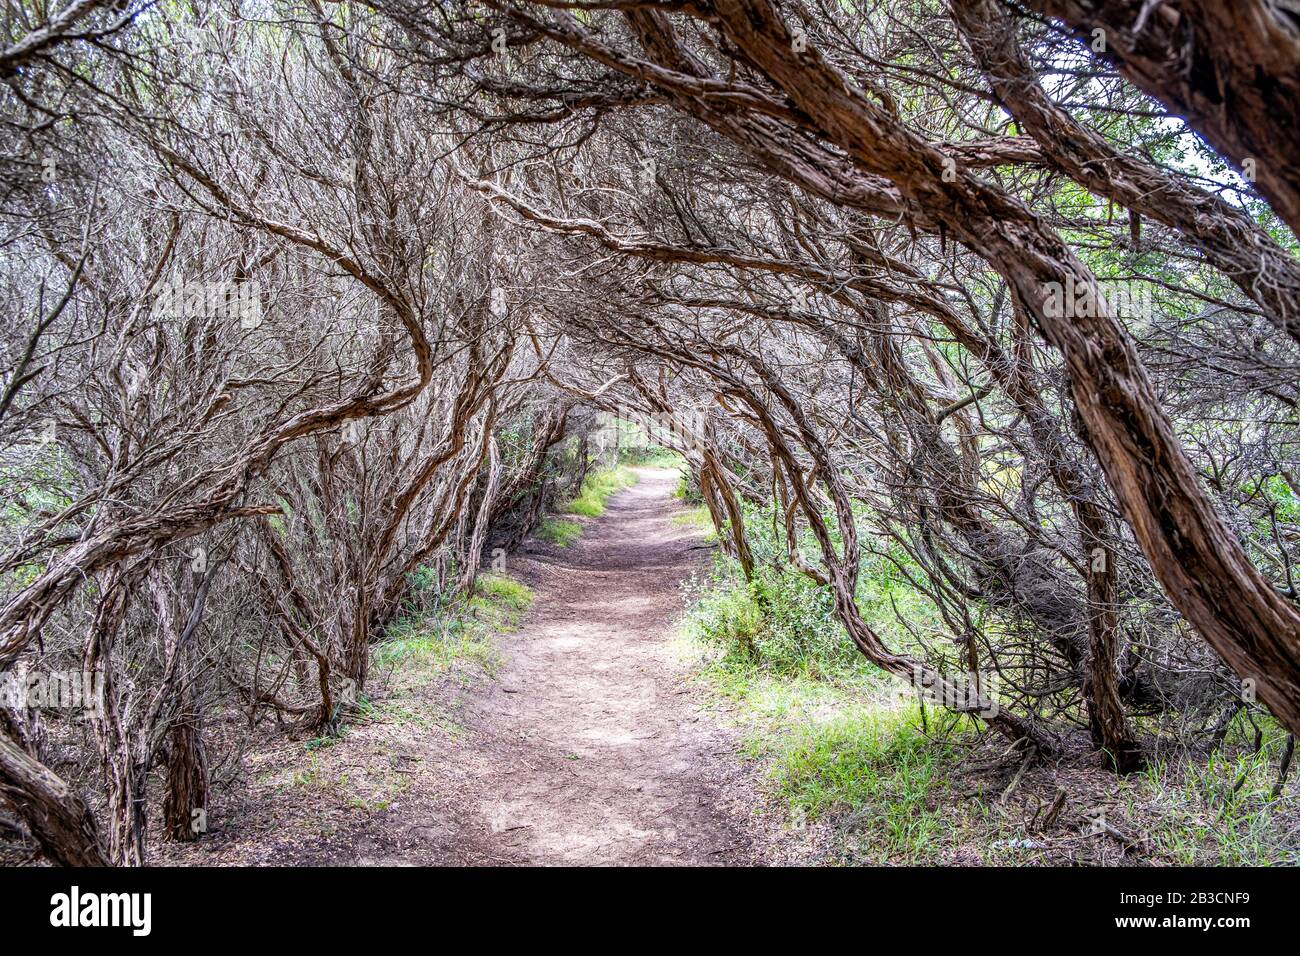 Dry coastal vegetation forming a vault over empty pathway near the ocean in Melbourne, Australia Stock Photo